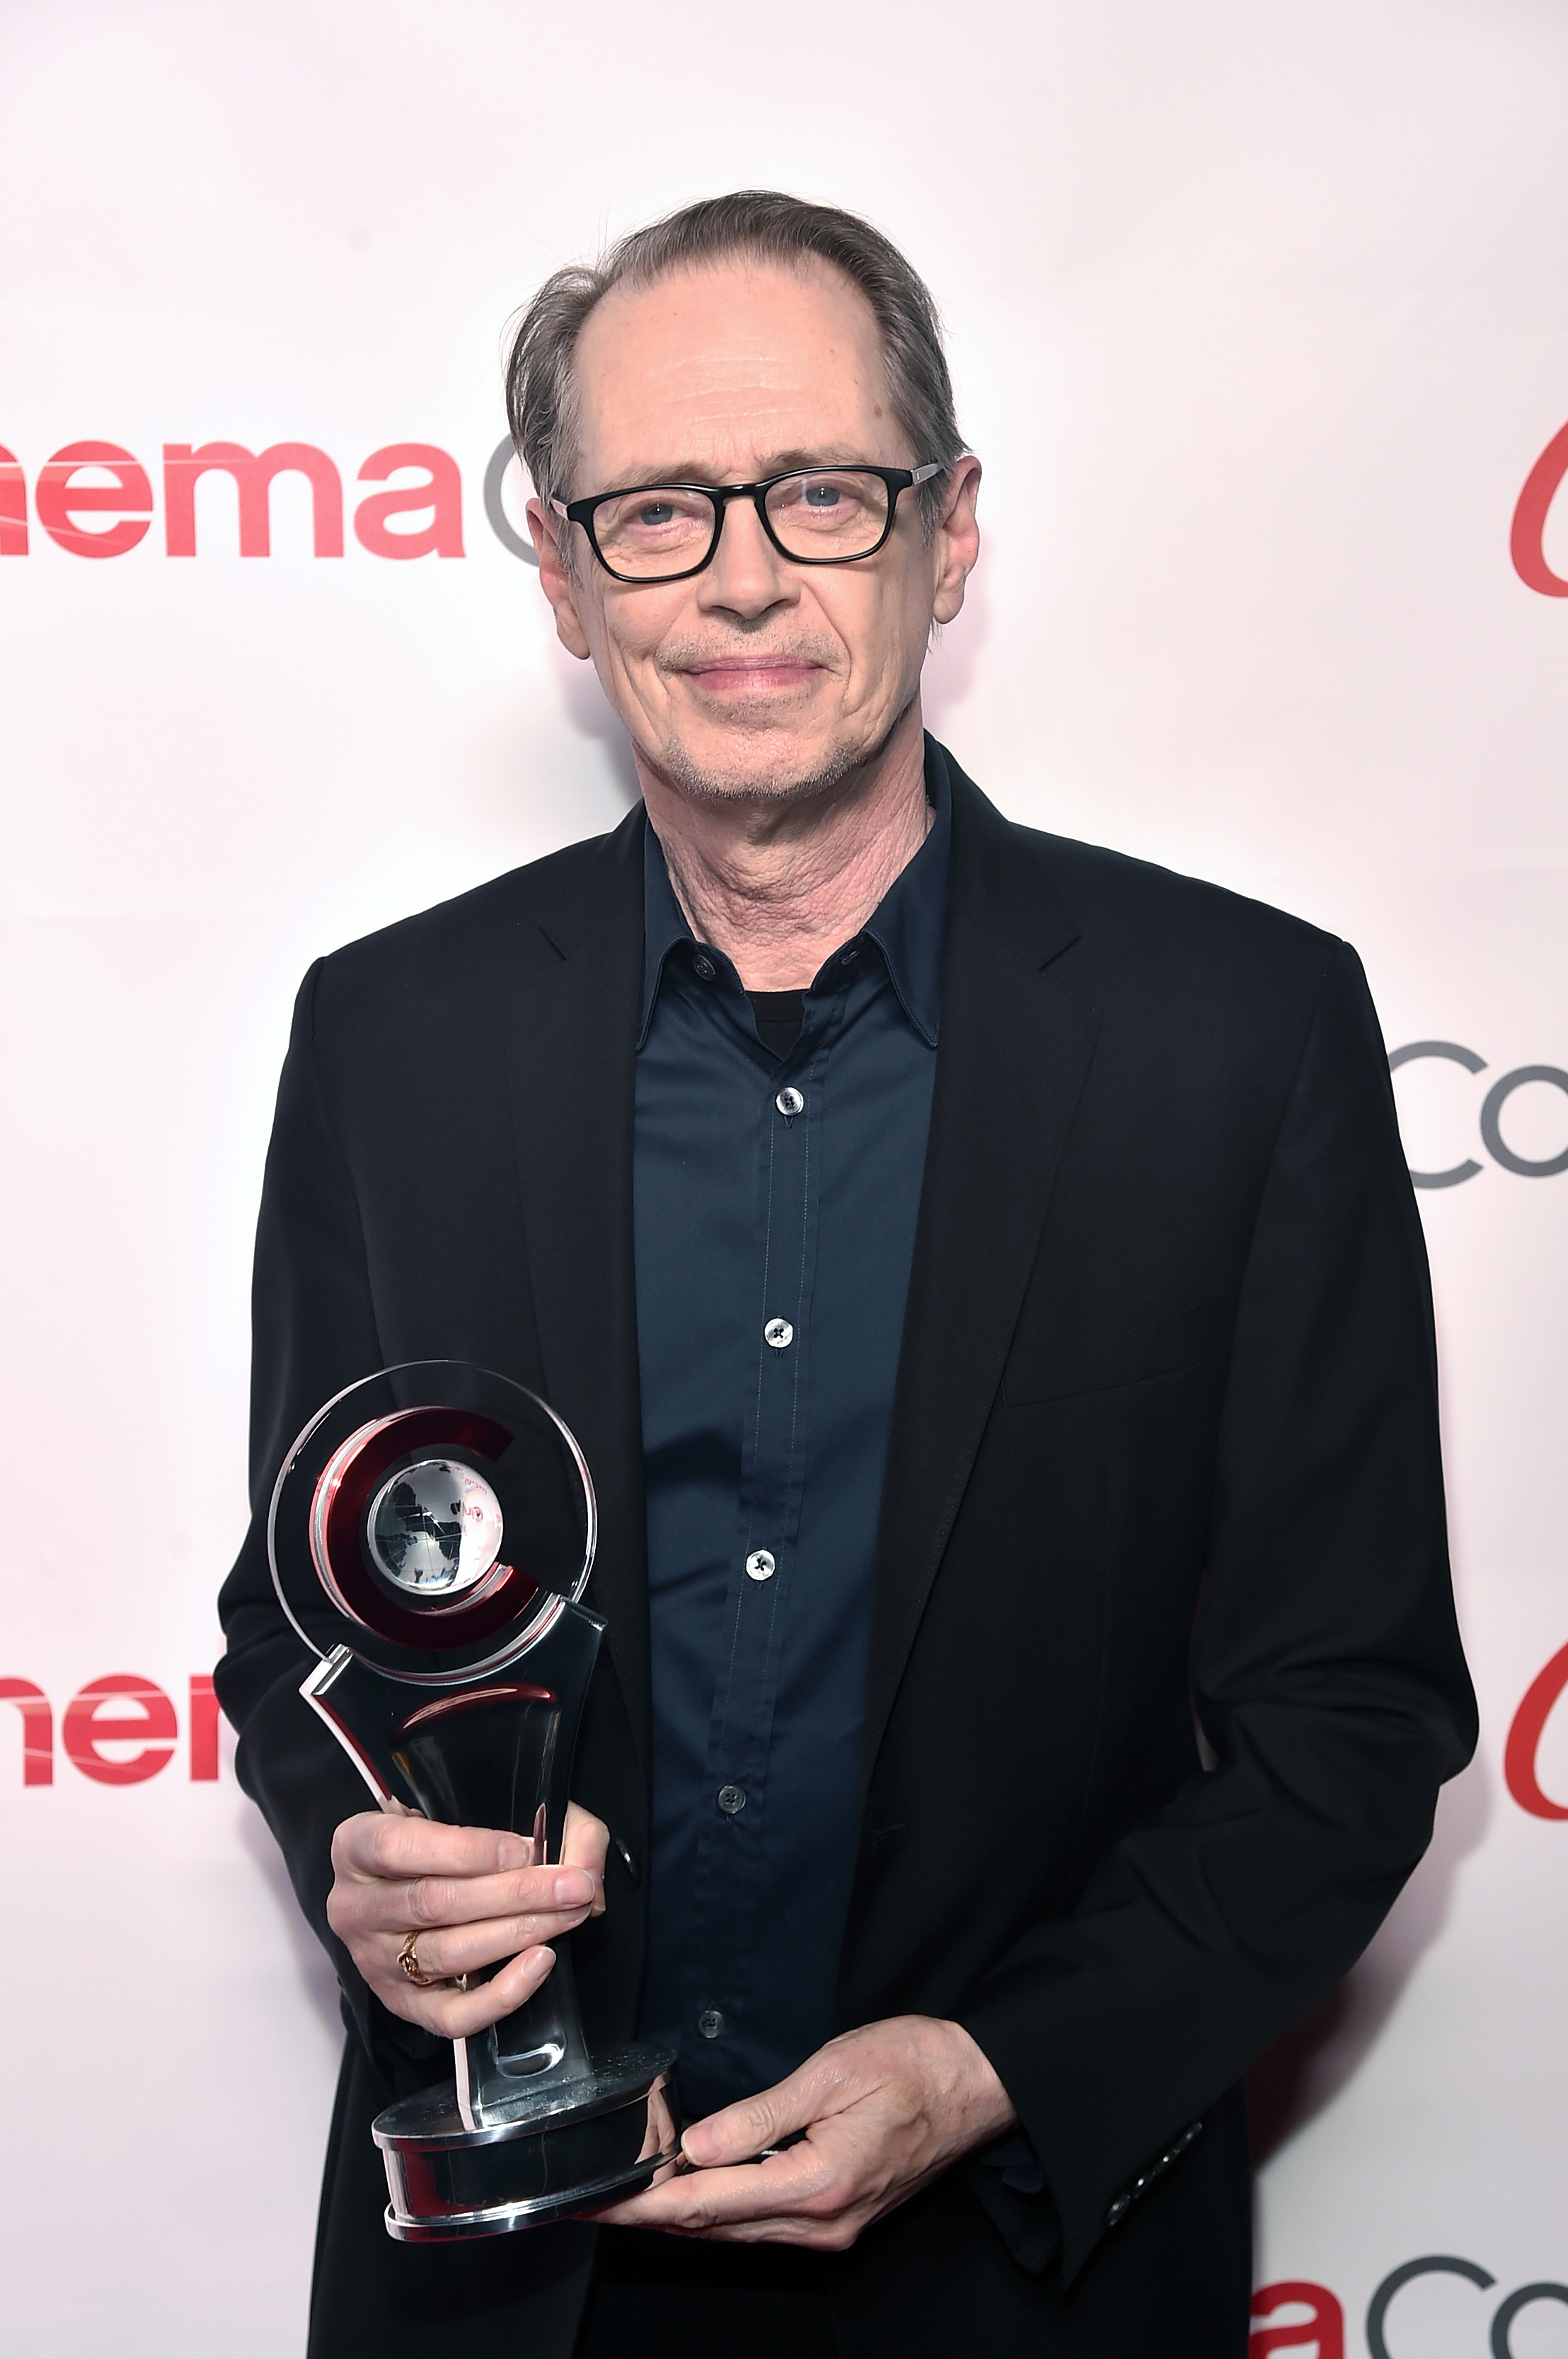 Steve Buscemi attends The CinemaCon Big Screen Achievement Awards where he received the Cinema Icon Award in Las Vegas, Nevada, on April 4, 2019 | Source: Getty Images